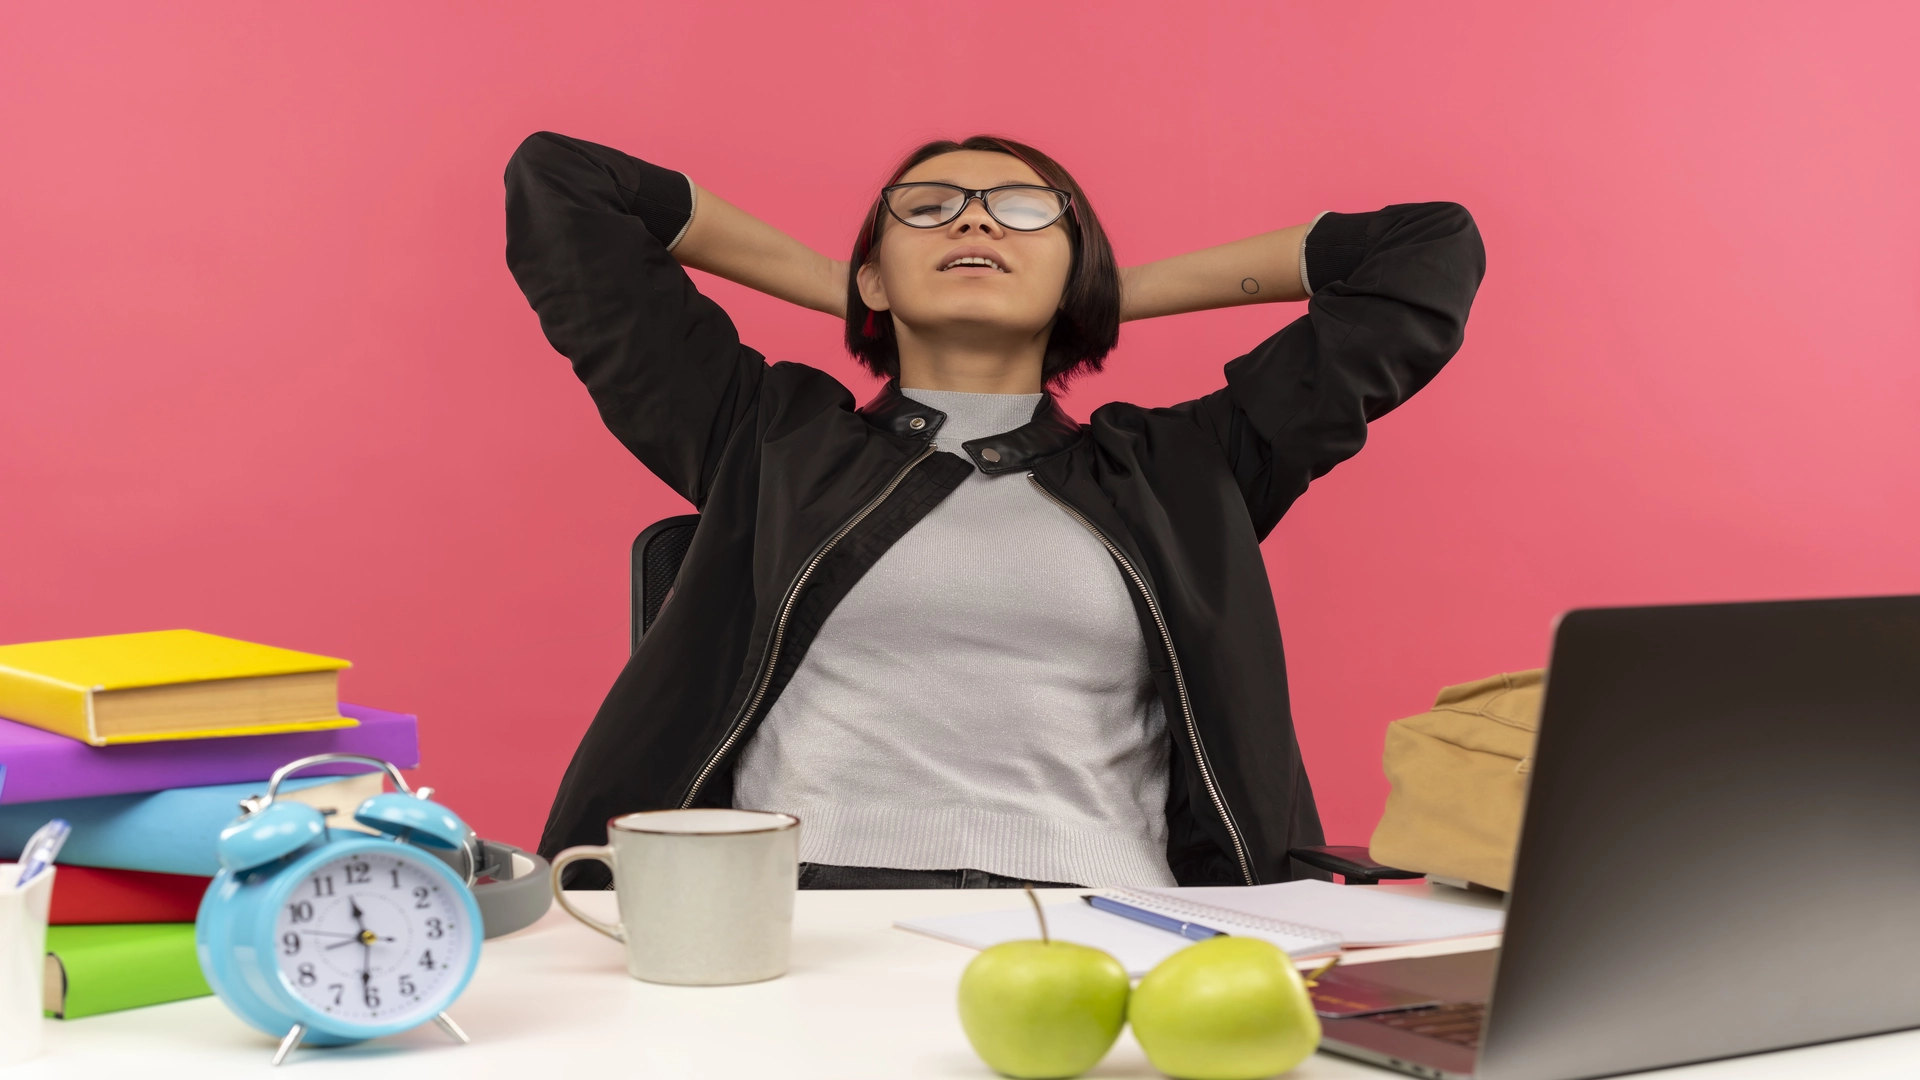 peaceful-young-student-girl-wearing-glasses-sitting-desk-putting-hands-neck-with-closed-eyes-isolated-pink-background